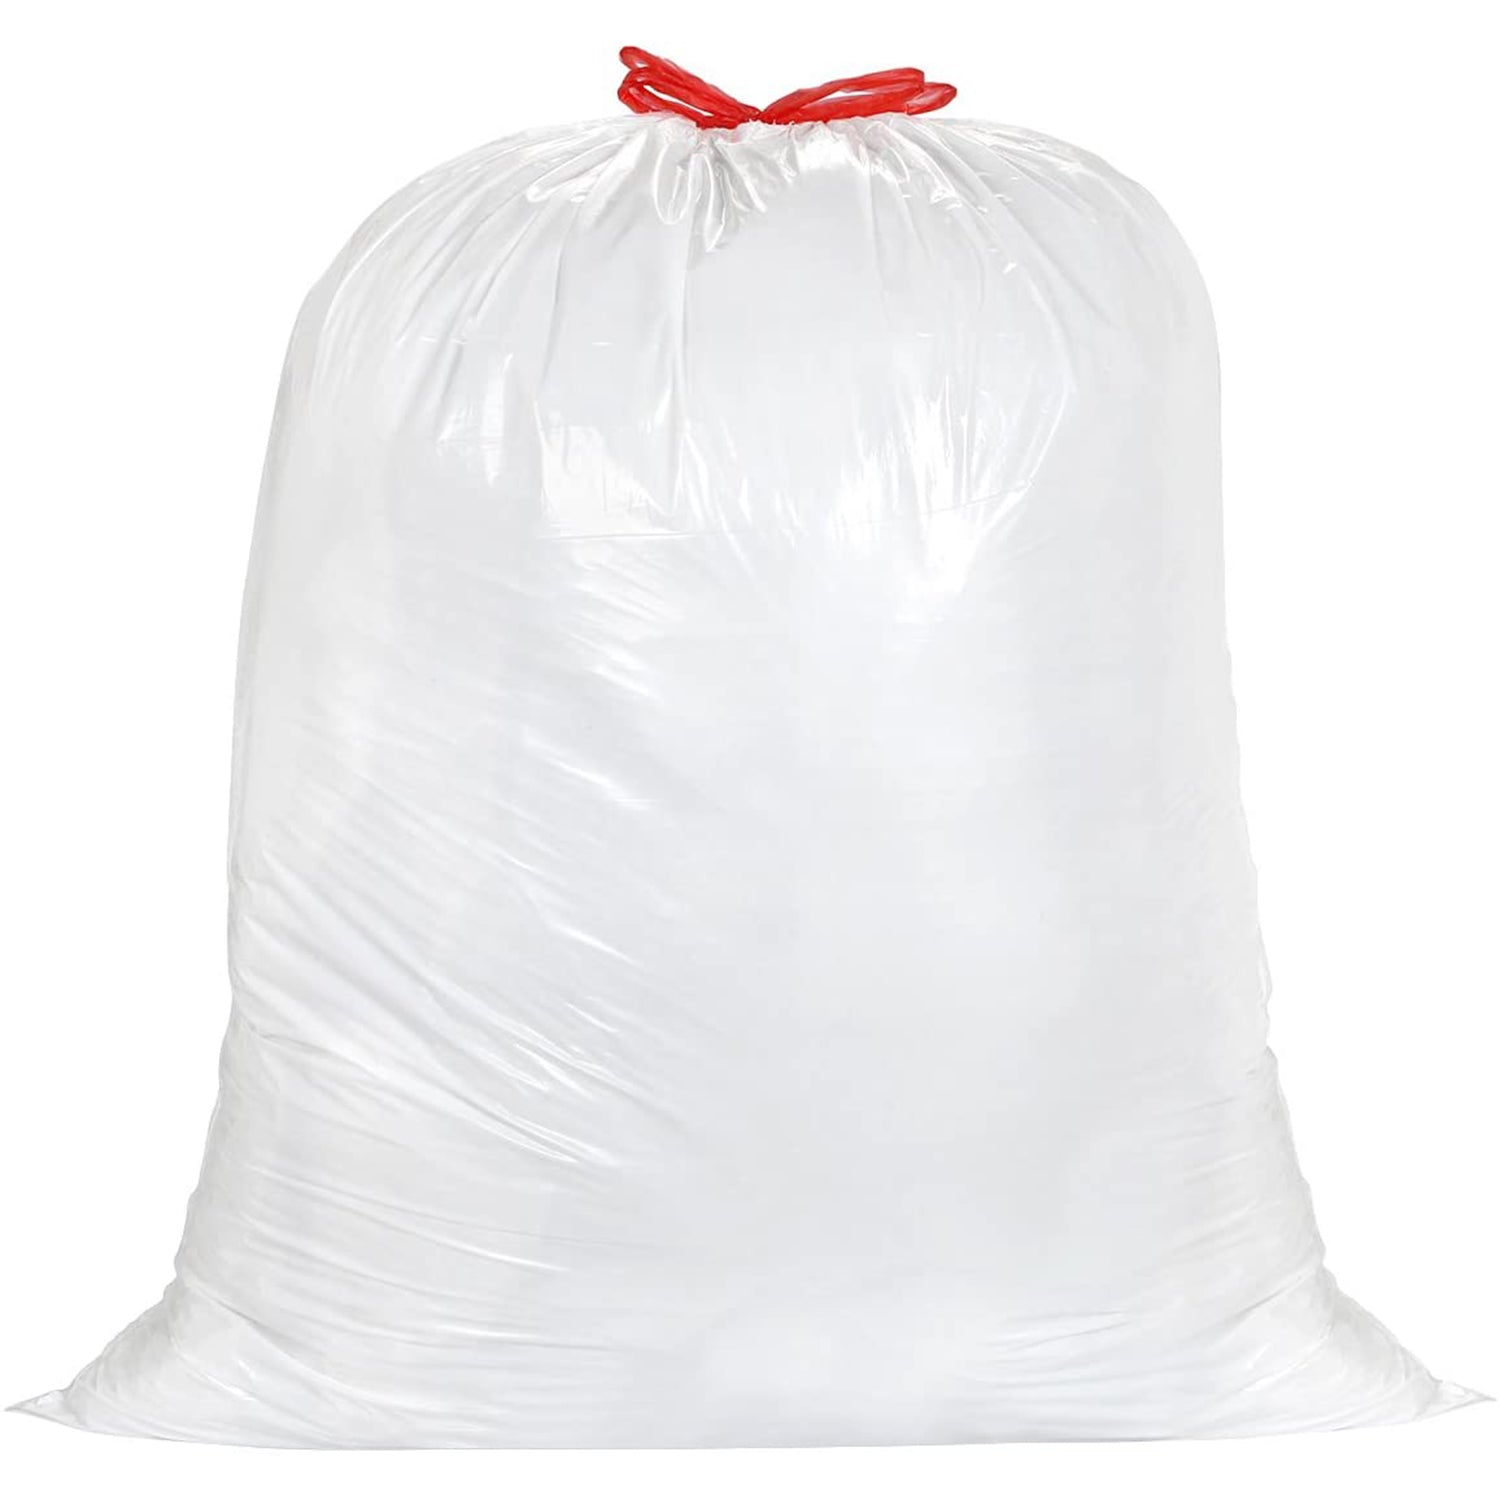 Seventh Generation Trash Bags, Kitchen Drawstring, White, Extra Strong, Tall, 13 Gallon - 20 bags